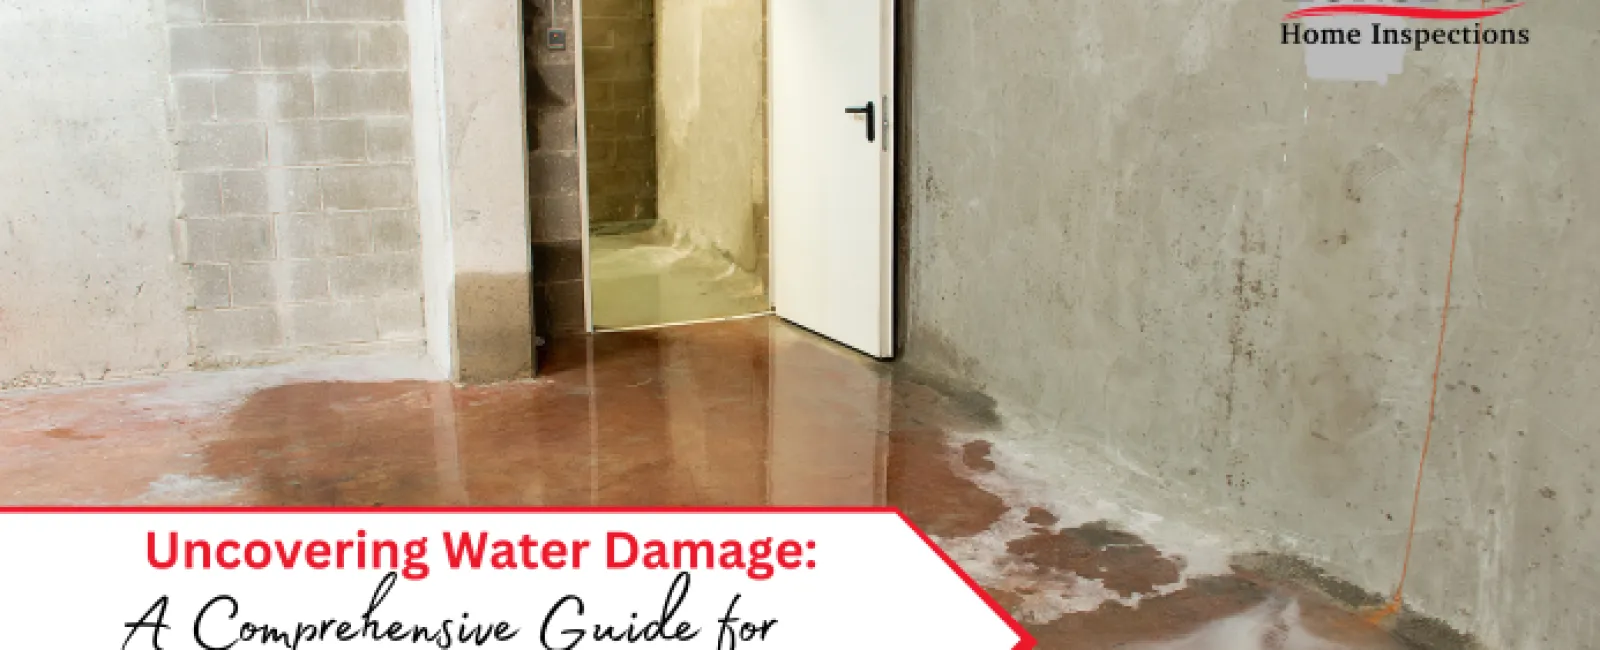 Uncovering Water Damage: A Comprehensive Guide for Homeowners in North Carolina